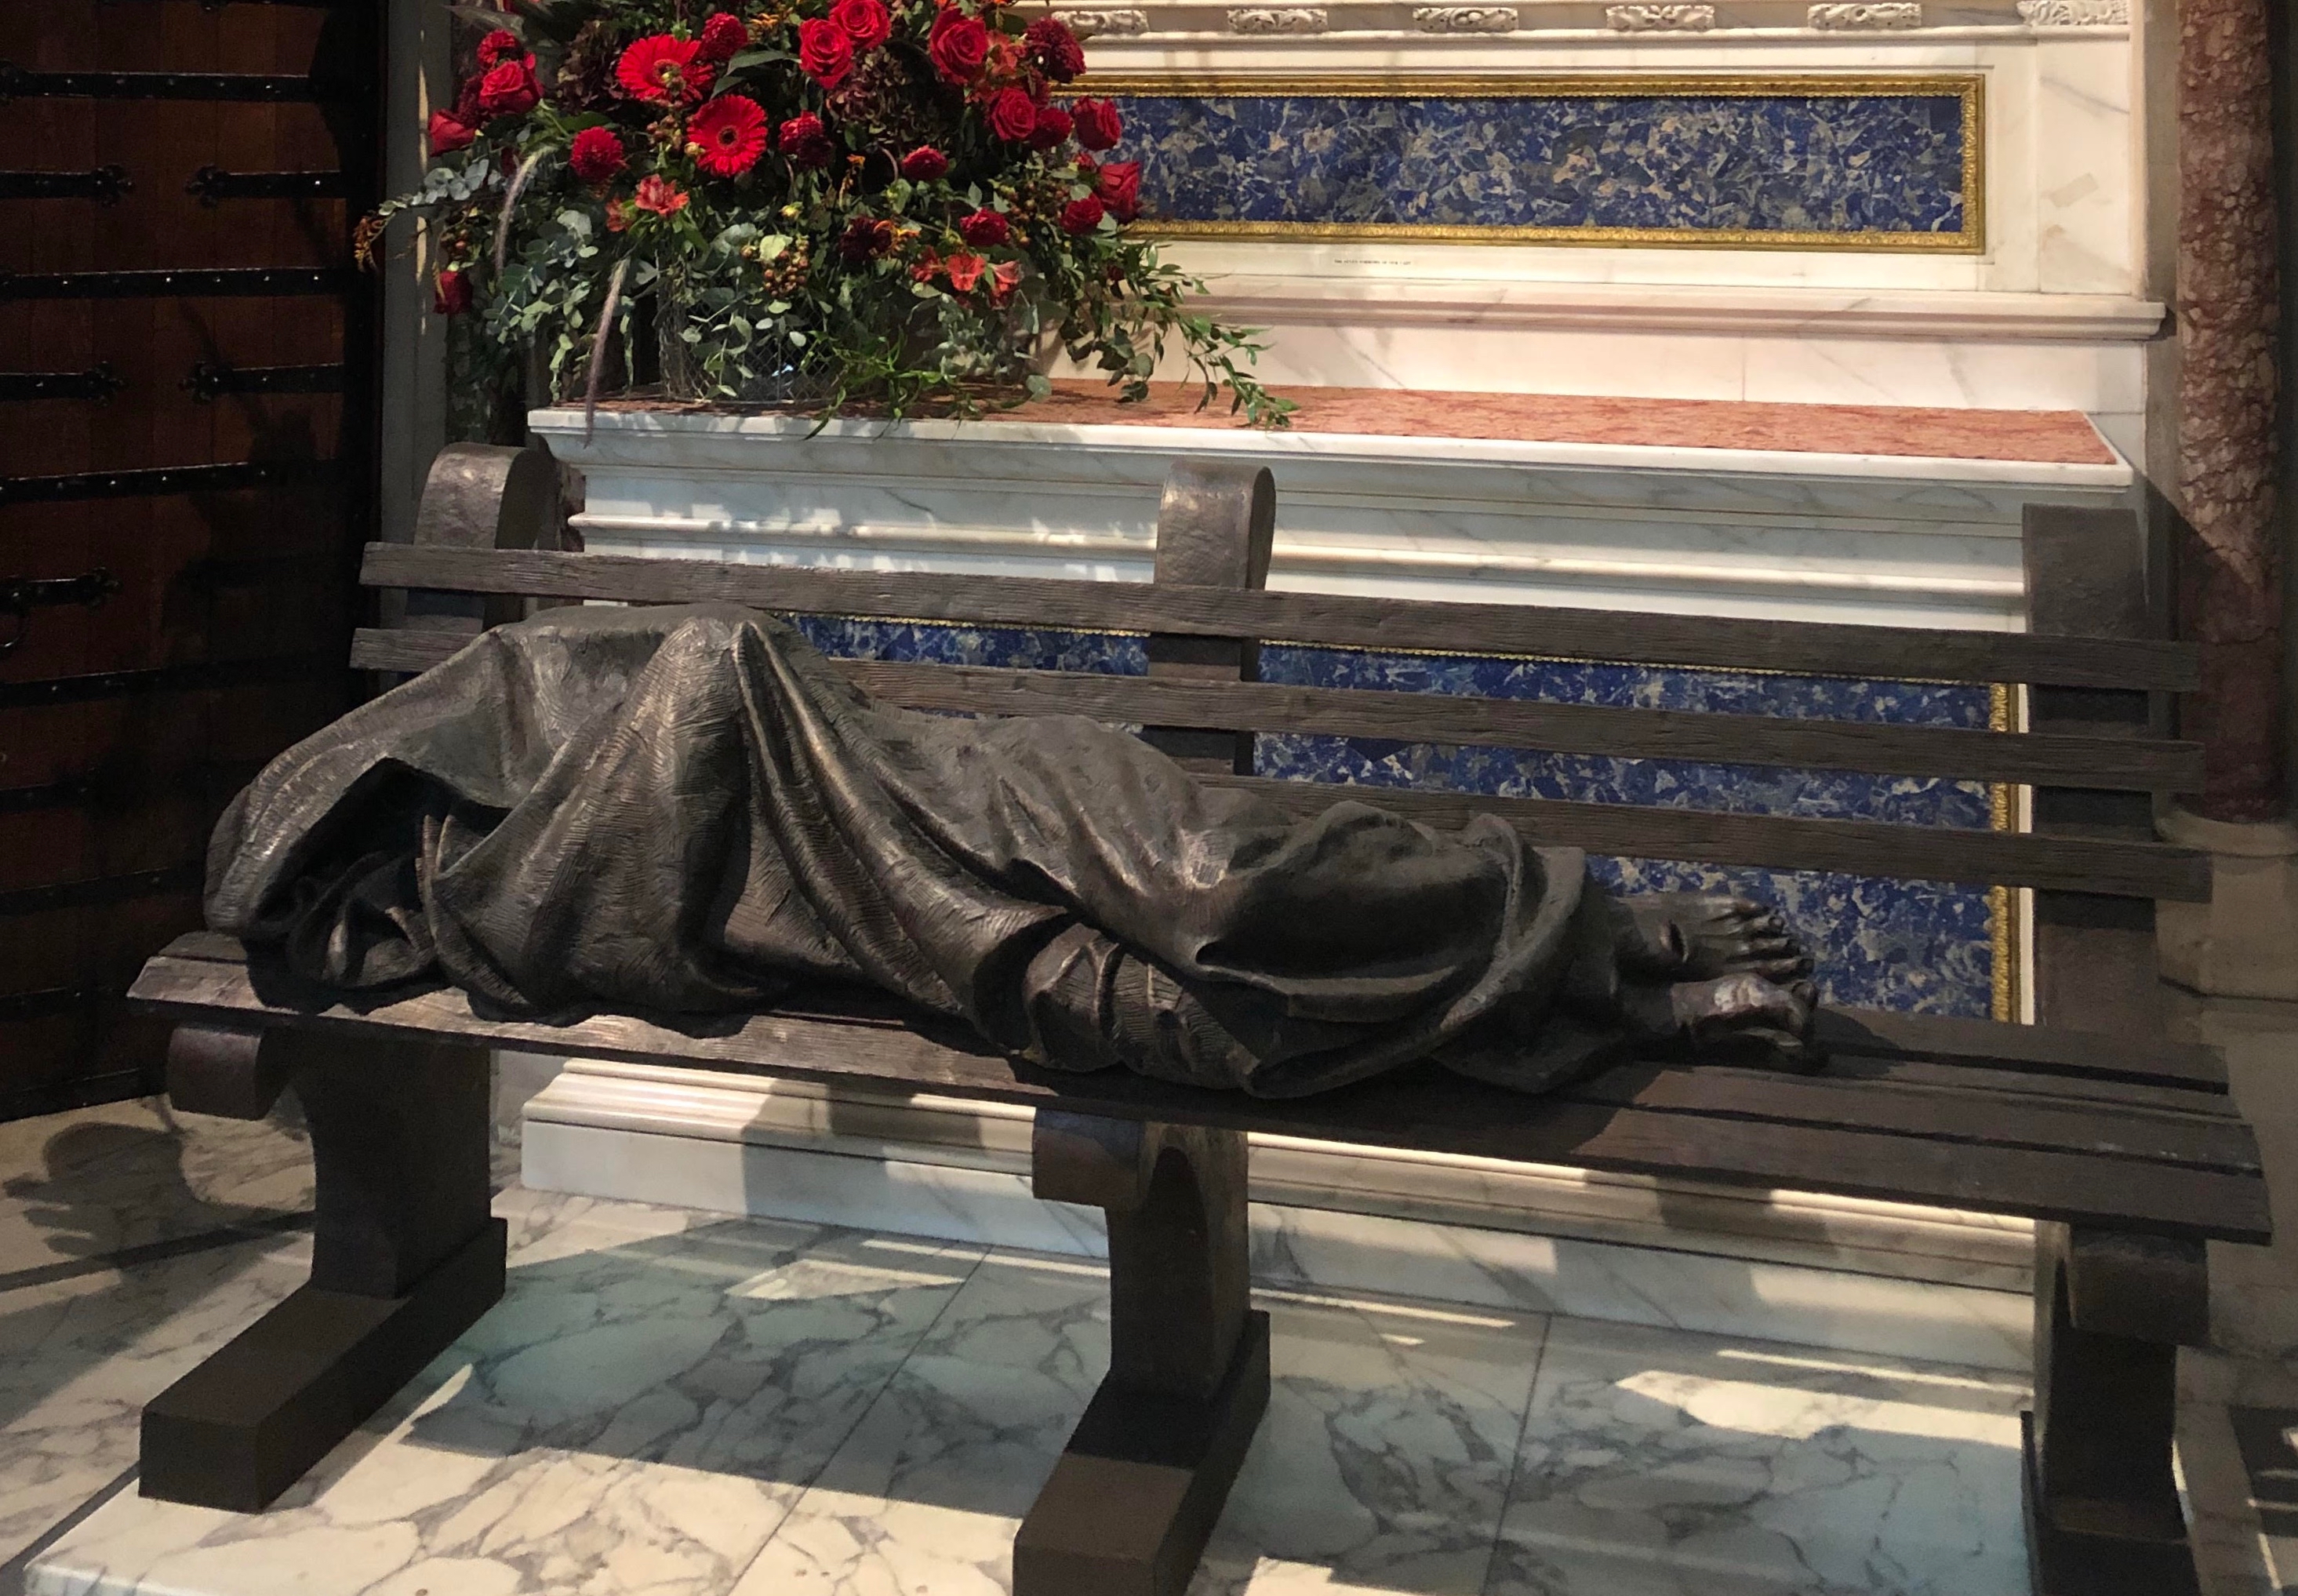 Homeless Jesus finds place to lay his head in London